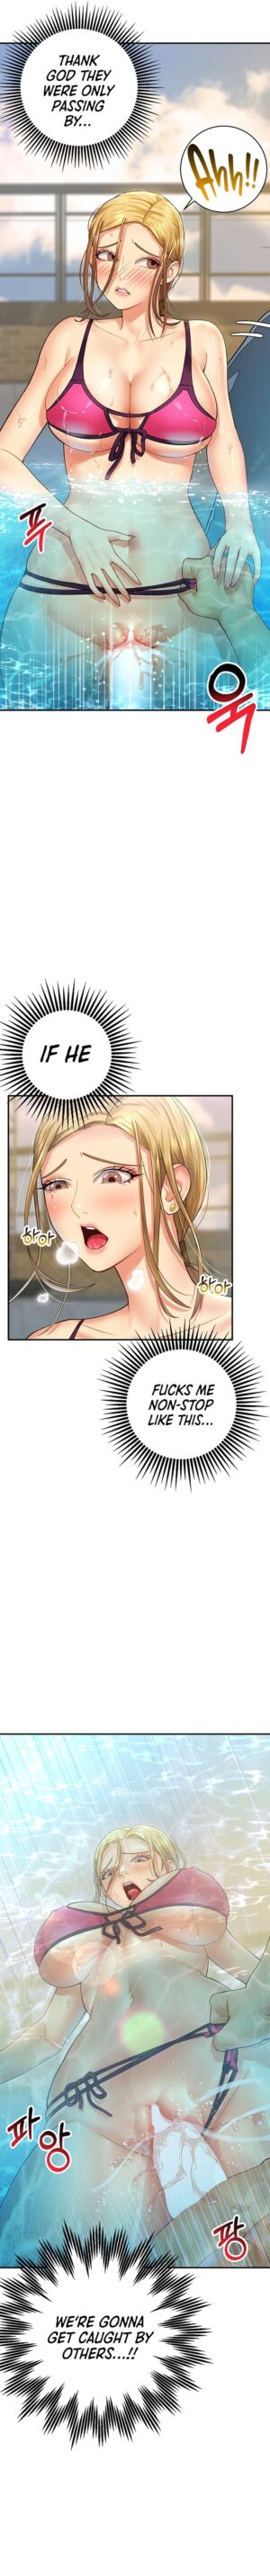 [Peep Show & DongA Writer] Like and Subscribe (1-22) [English] [Omega Scans] [Ongoing]